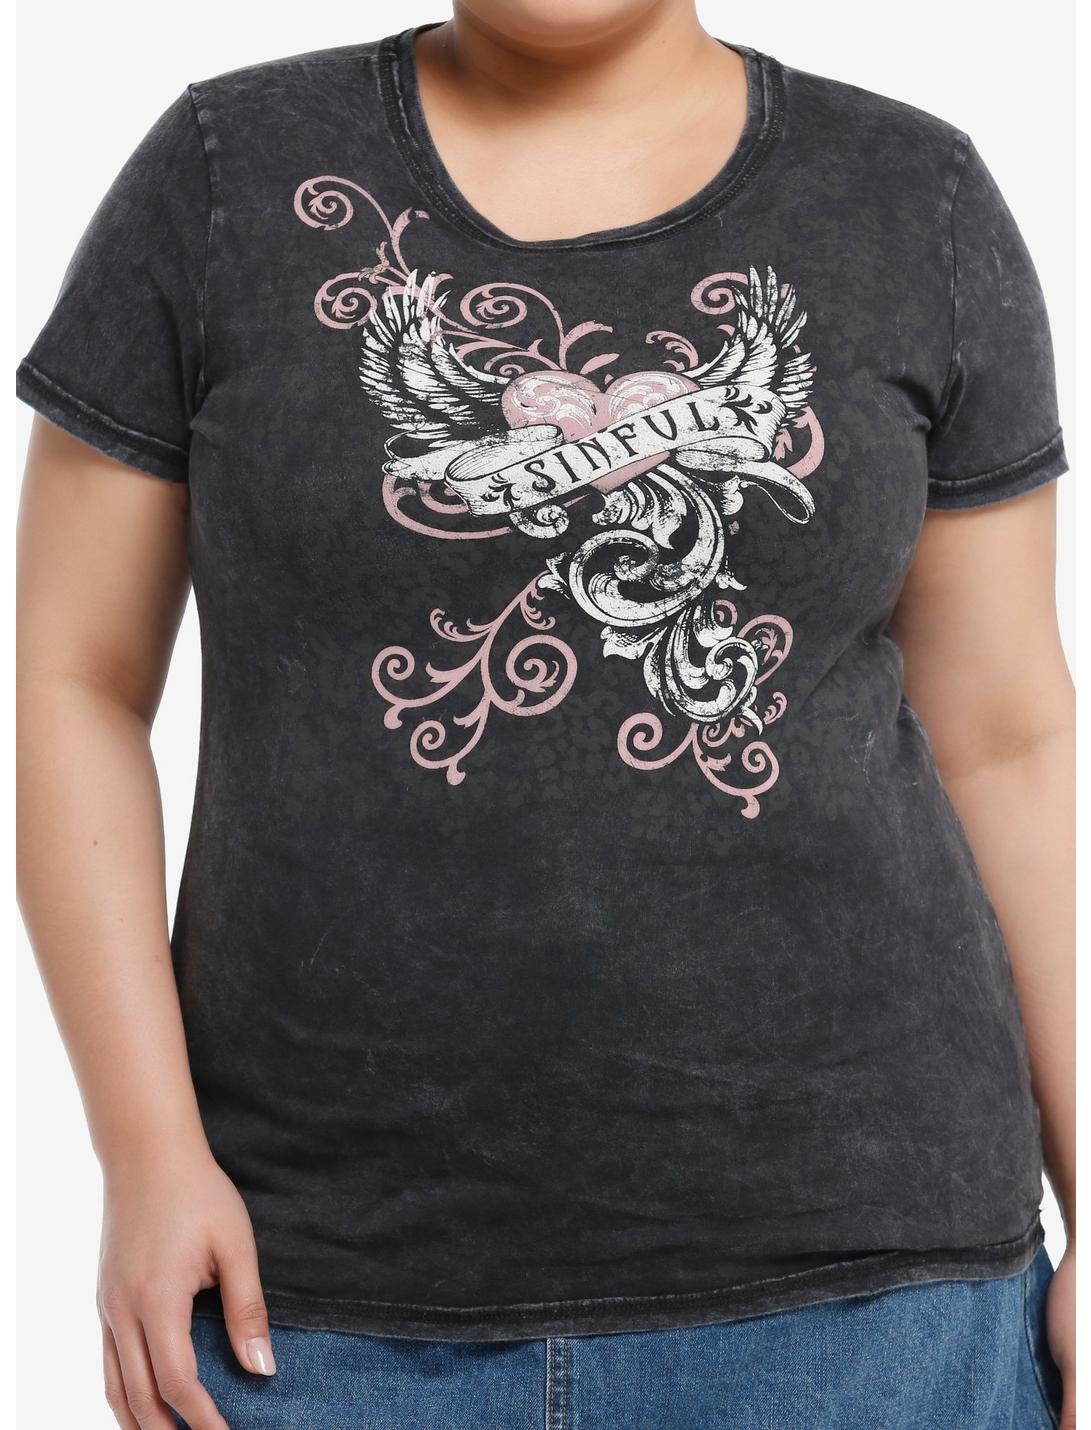 Social Collision Sinful Winged Heart Girls T-Shirt Plus Size, PINK, hi-res